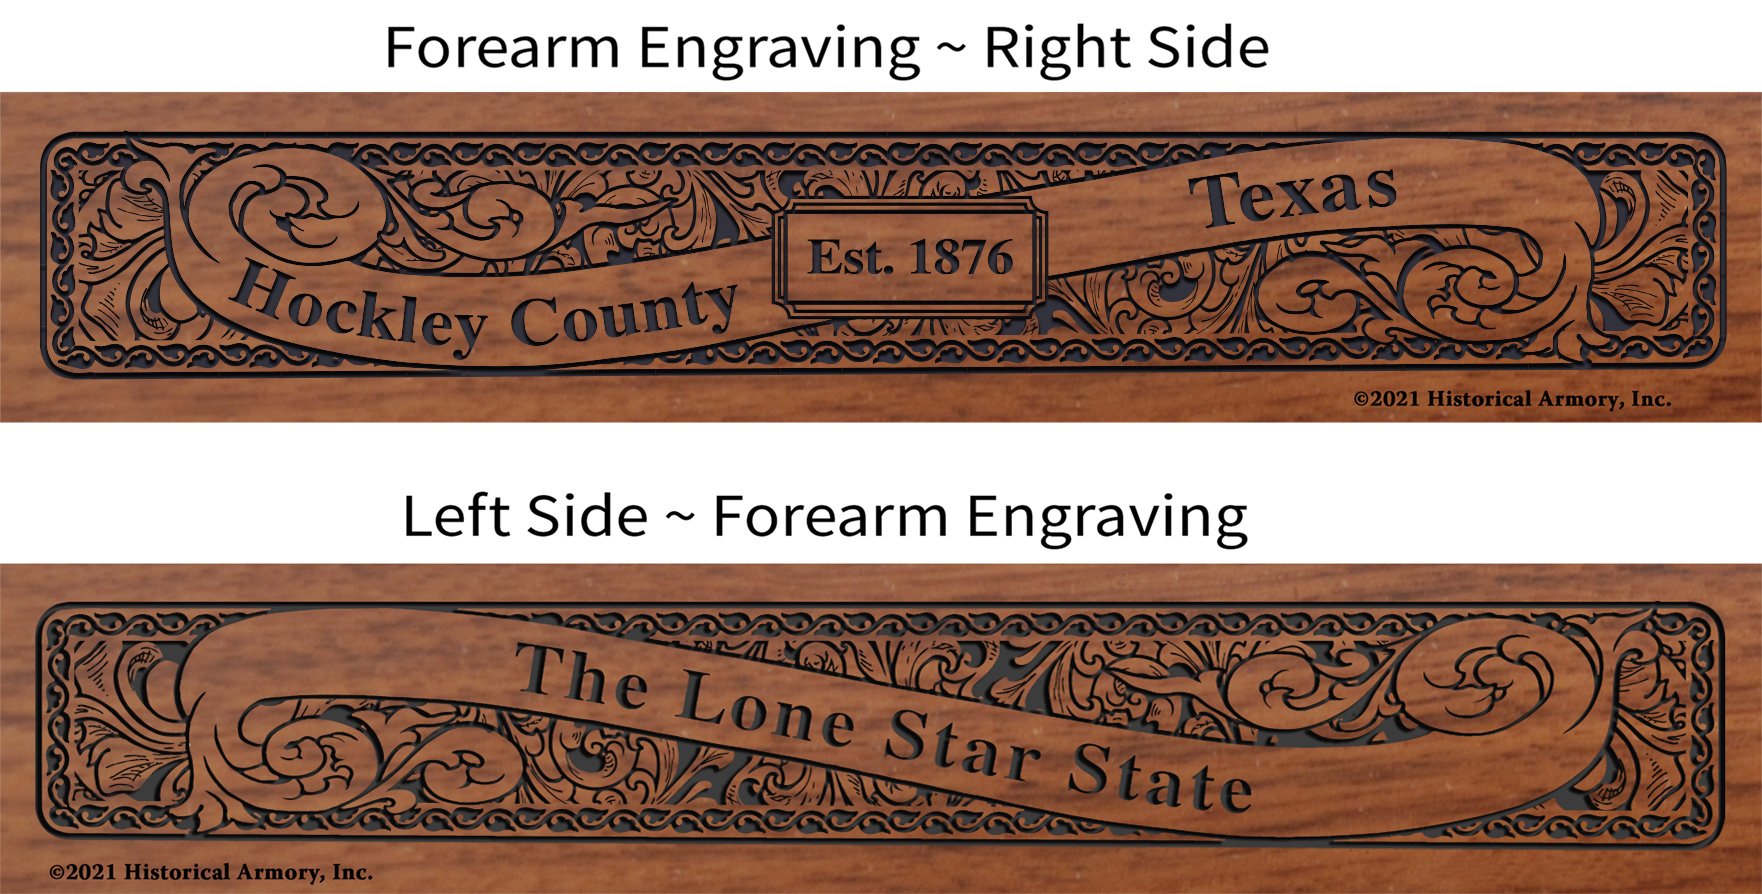 Hockley County Texas Establishment and Motto History Engraved Rifle Forearm